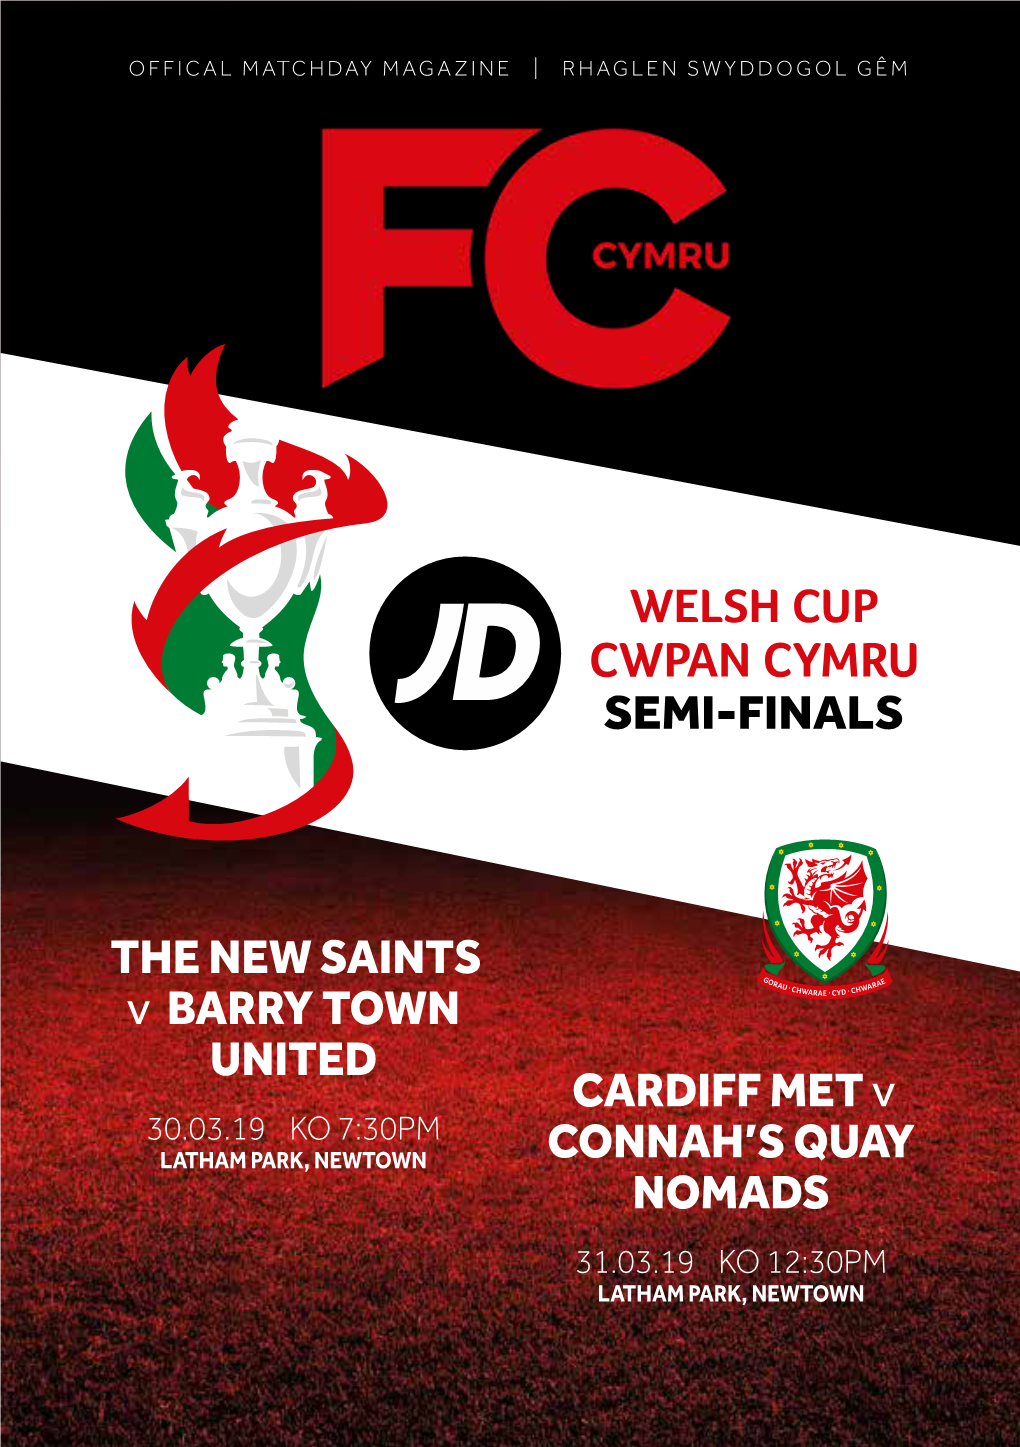 THE NEW SAINTS V BARRY TOWN UNITED CARDIFF MET V 30.03.19 KO 7:30PM LATHAM PARK, NEWTOWN CONNAH’S QUAY NOMADS